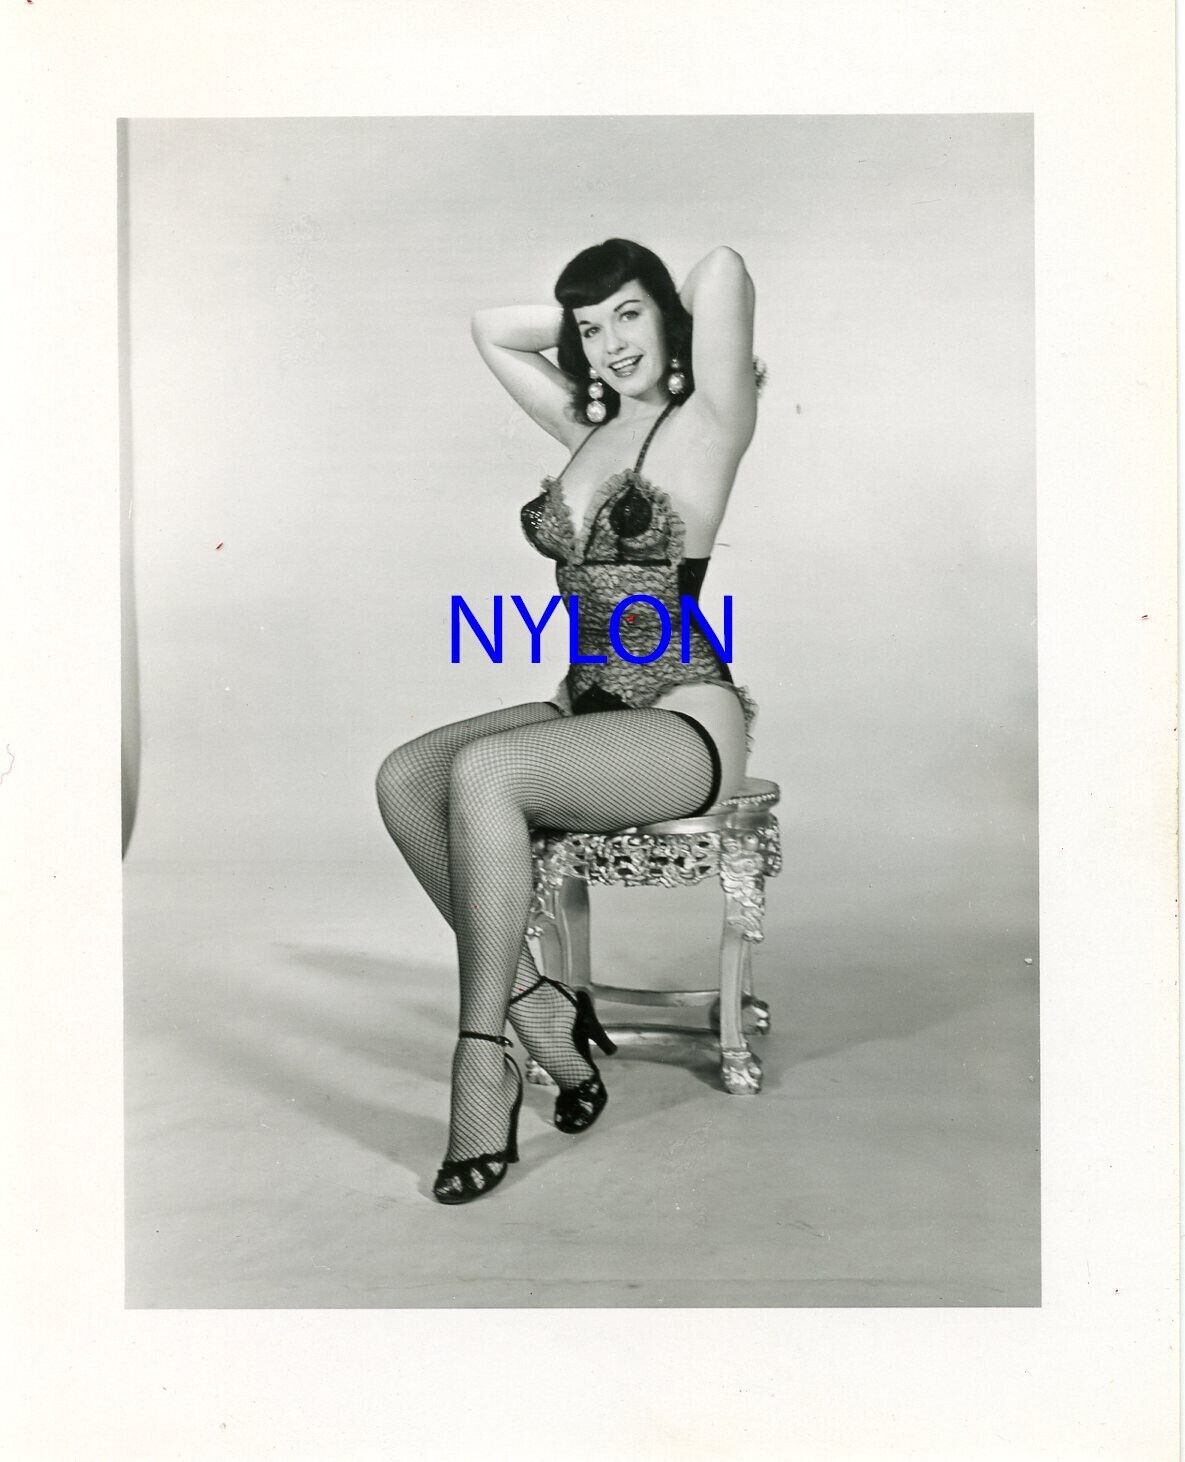 RARE BETTIE PAGE VINTAGE 1950's 4 x 5 PHOTOGRAPH BY ARNOLD KOVACS